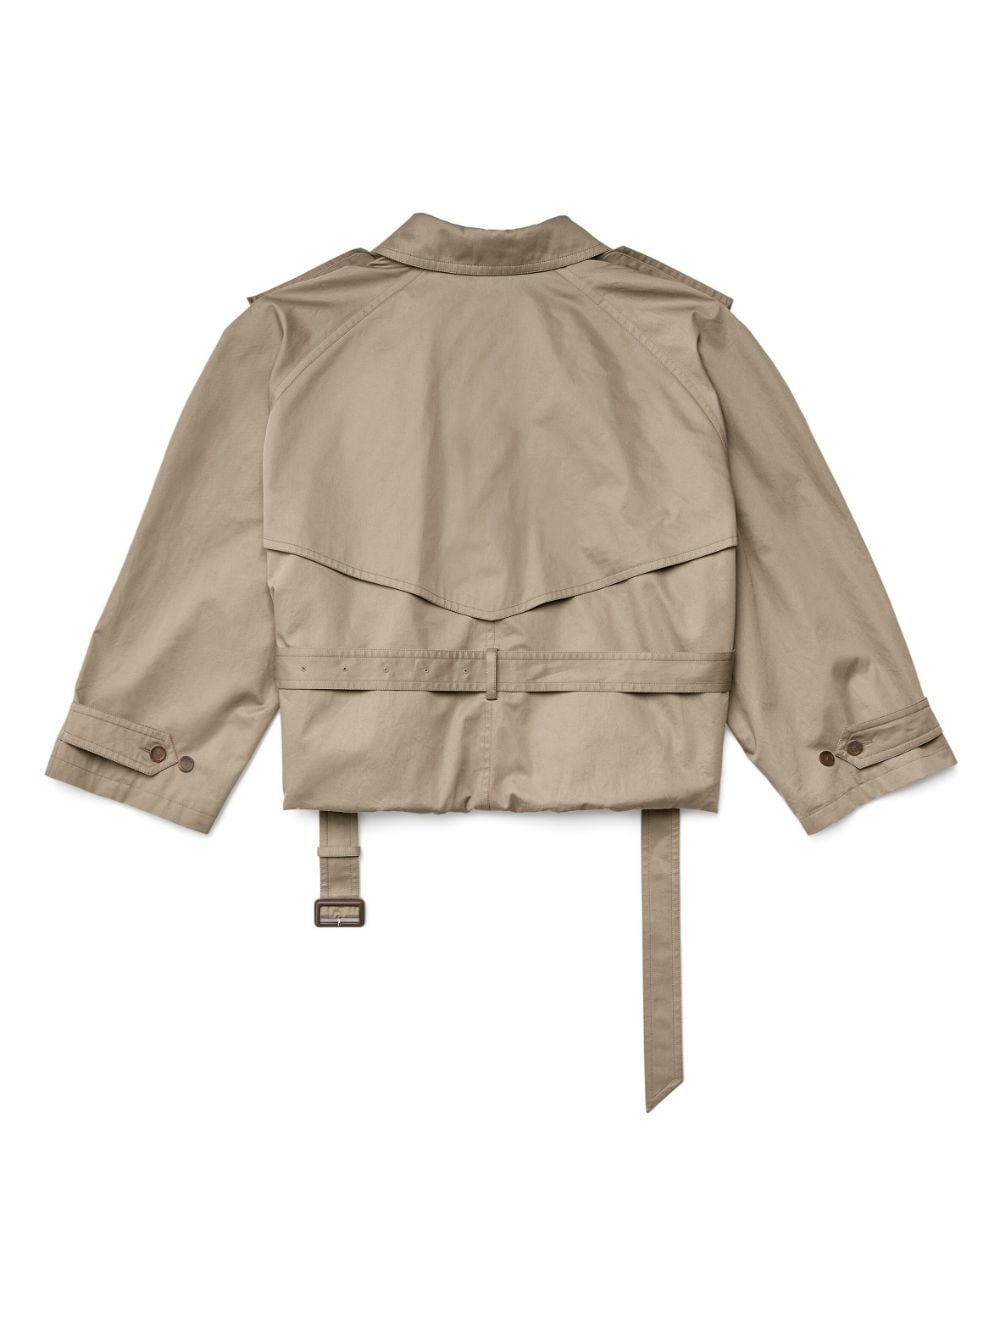 belted-waist cotton trench coat - 6